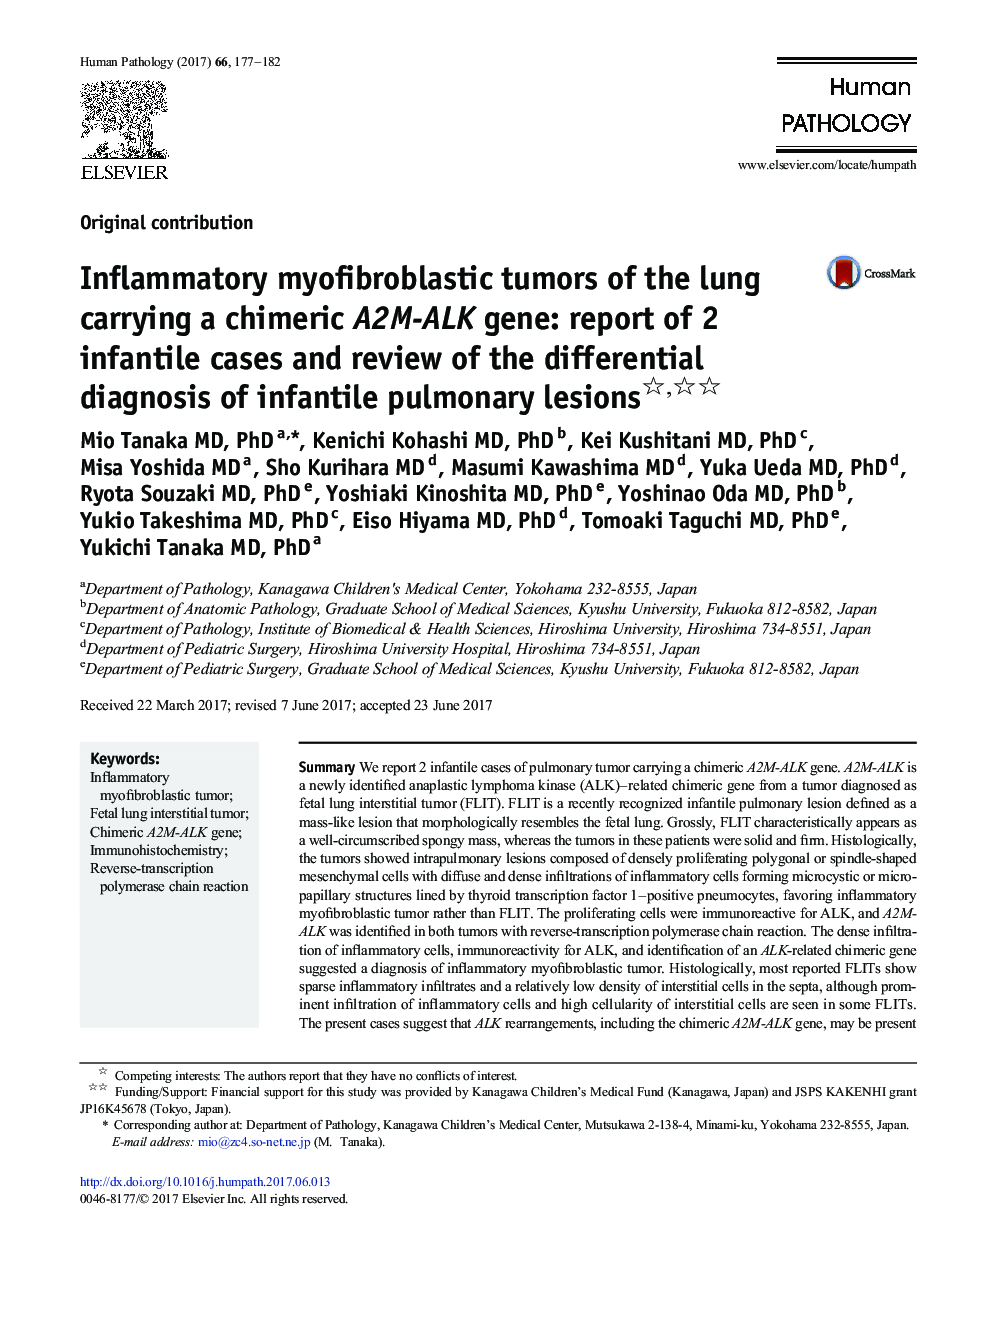 Original contributionInflammatory myofibroblastic tumors of the lung carrying a chimeric A2M-ALK gene: report of 2 infantile cases and review of the differential diagnosis of infantile pulmonary lesions